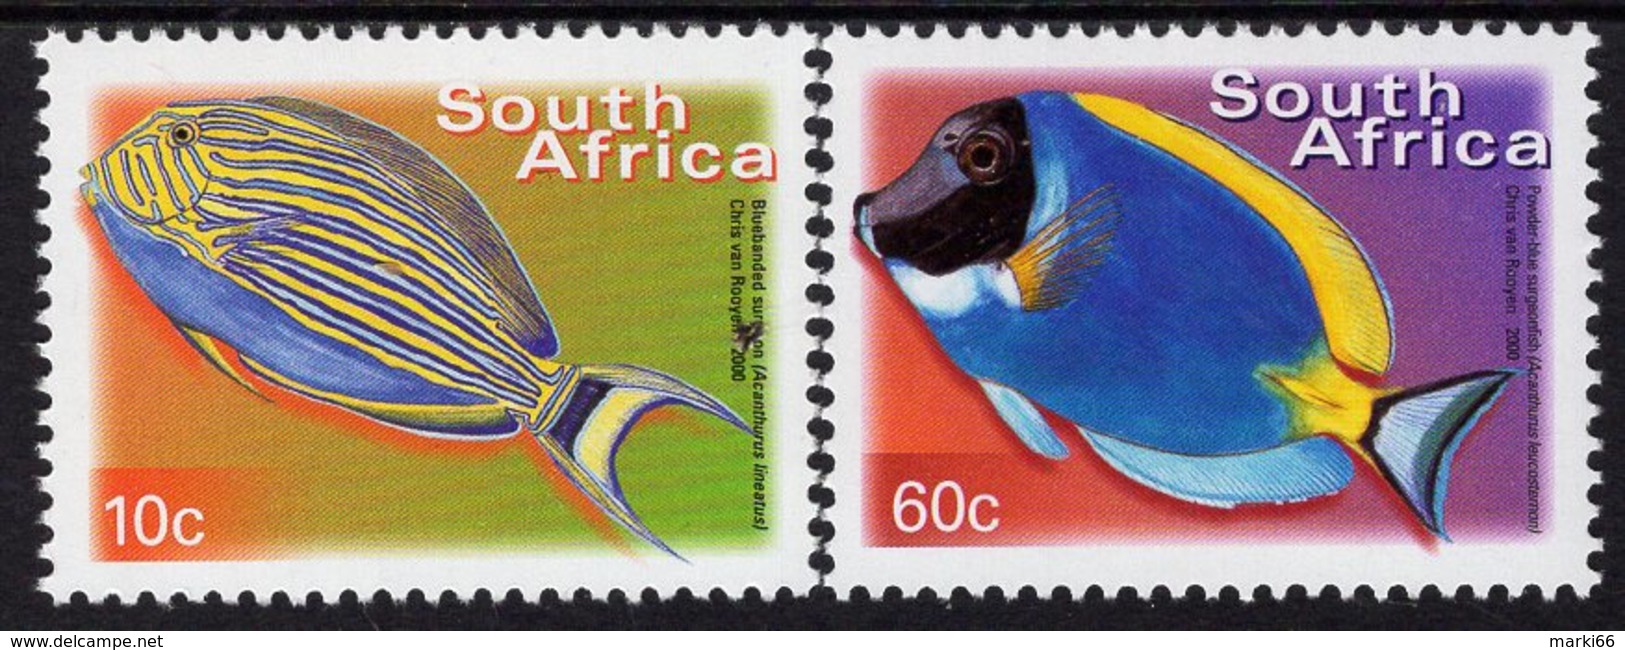 South Africa - 2014 - Colourful South Africa - Fish - 7th Definitive Series - Mint Stamp Set - Ongebruikt